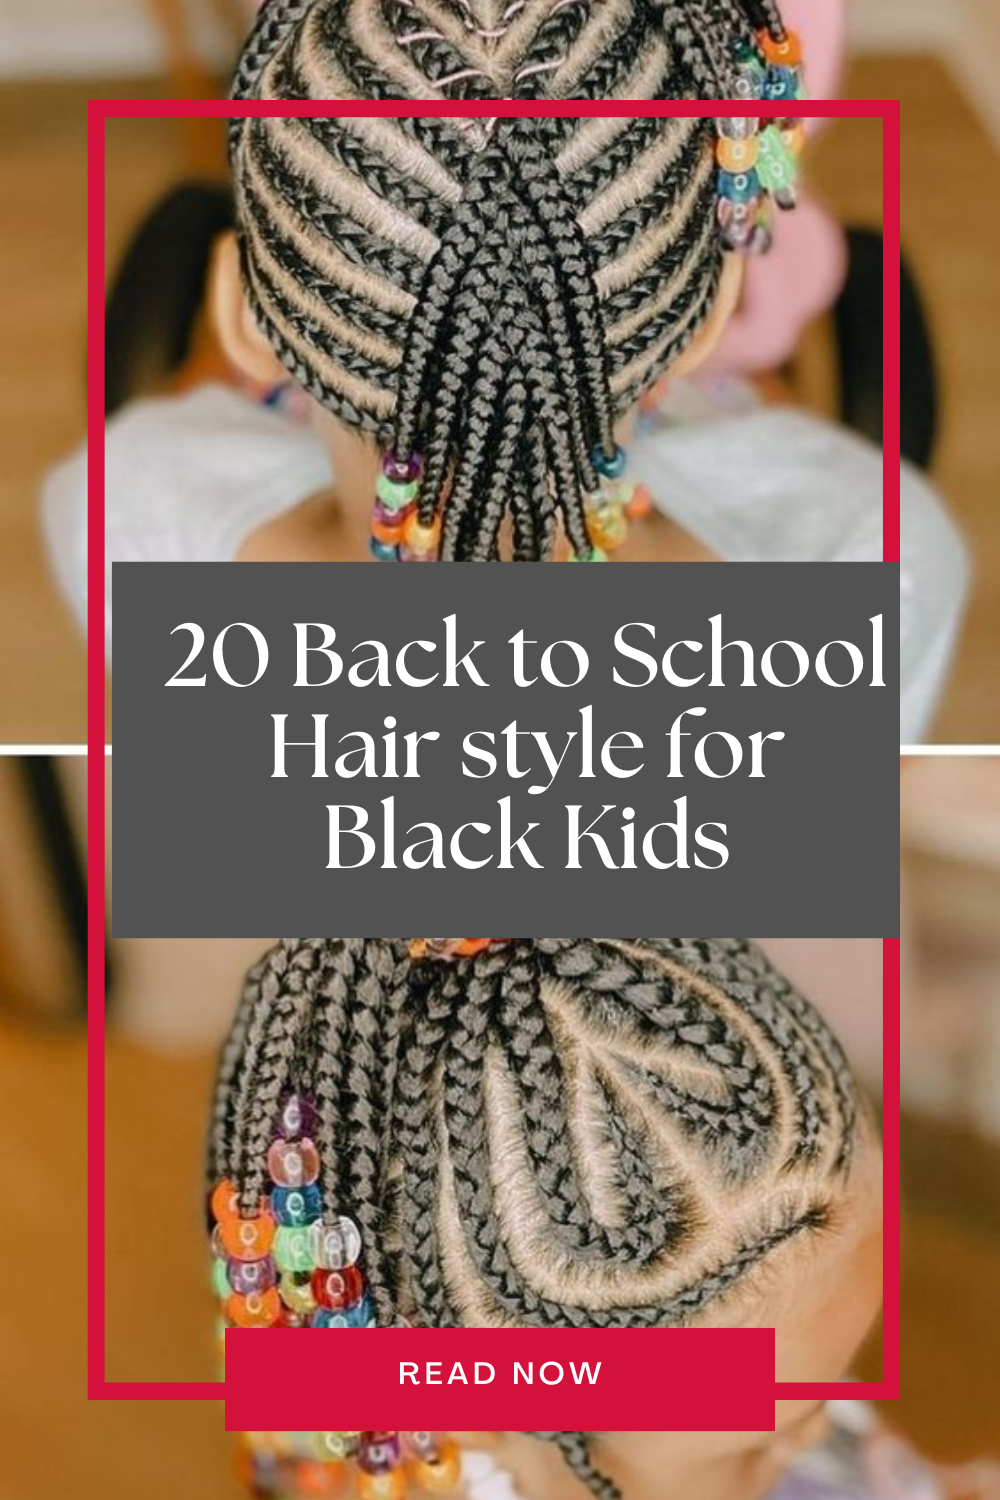 GlambyNicitah - Kids protective hairstyles @glambynicitah... | Facebook